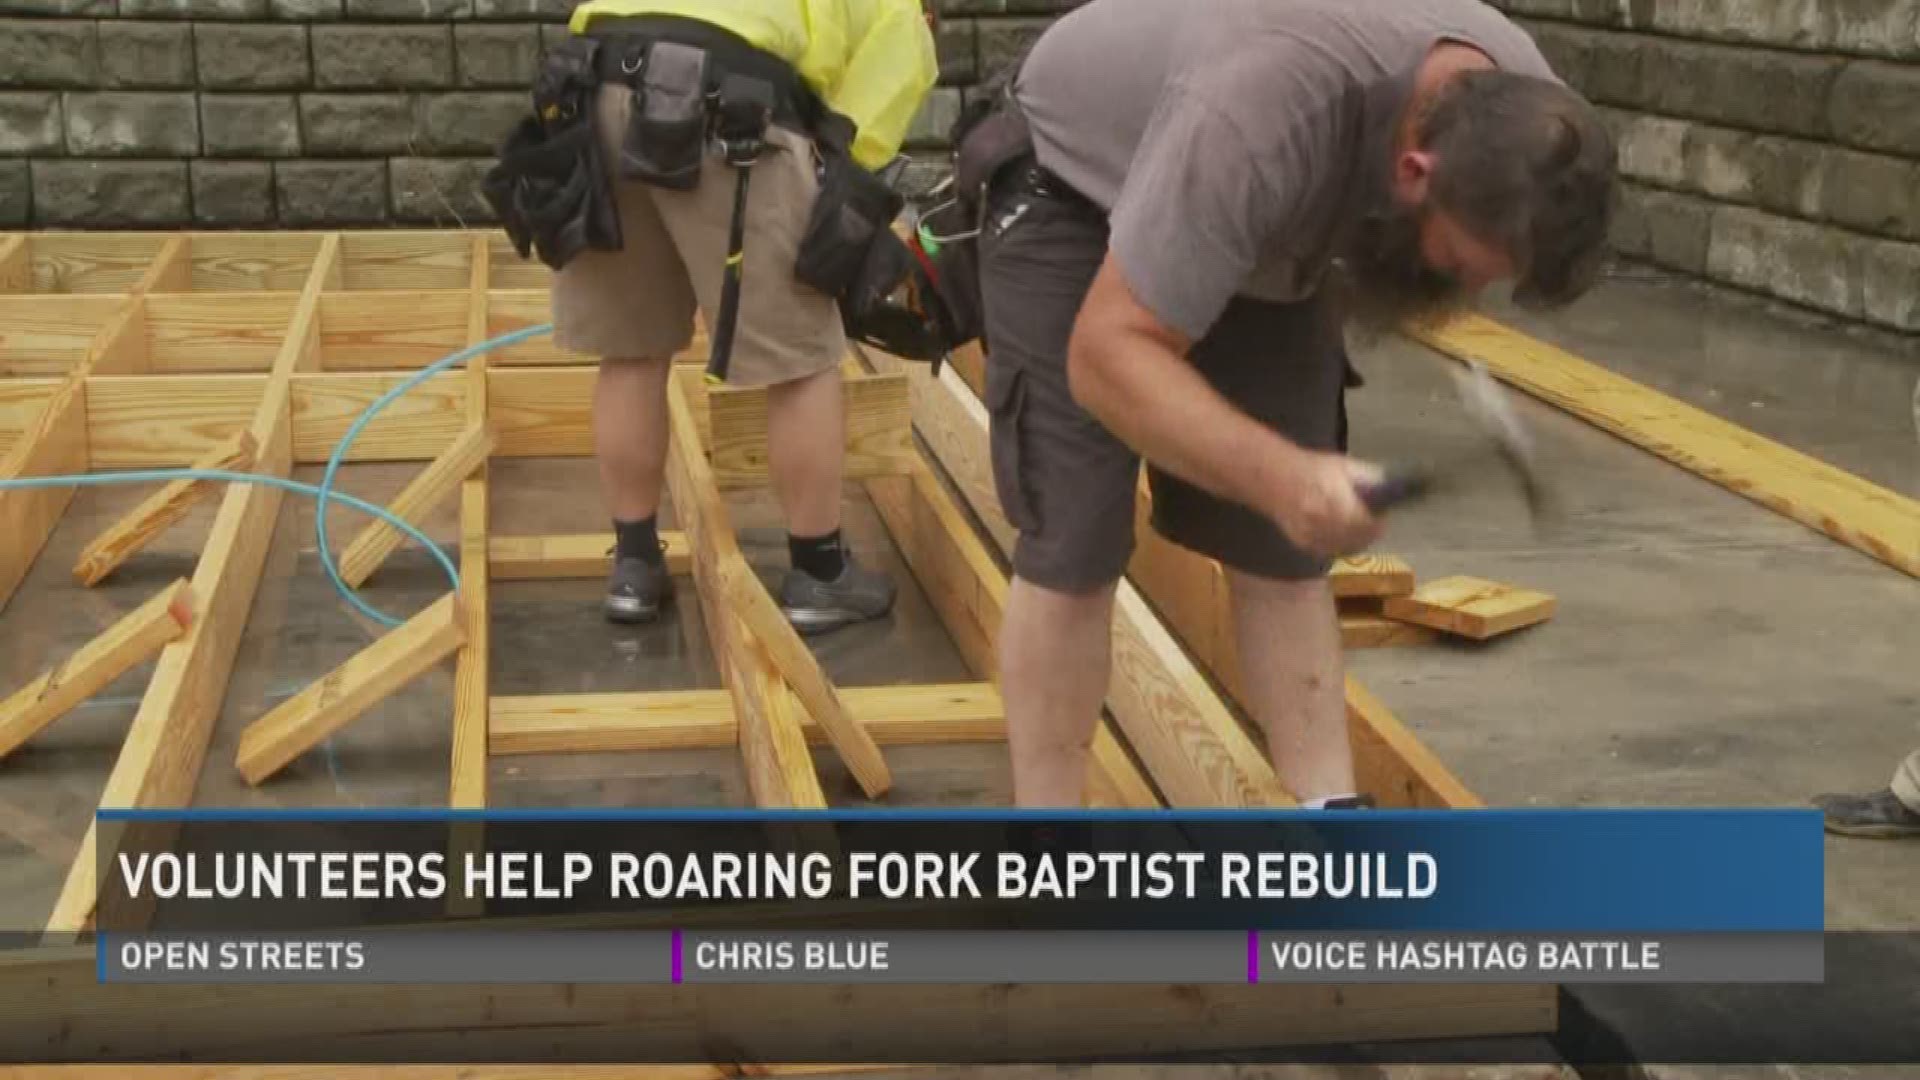 Last November, the Sevier County wildfires turned the church into rubble and ash. But volunteers are helping rebuild it stronger than ever.